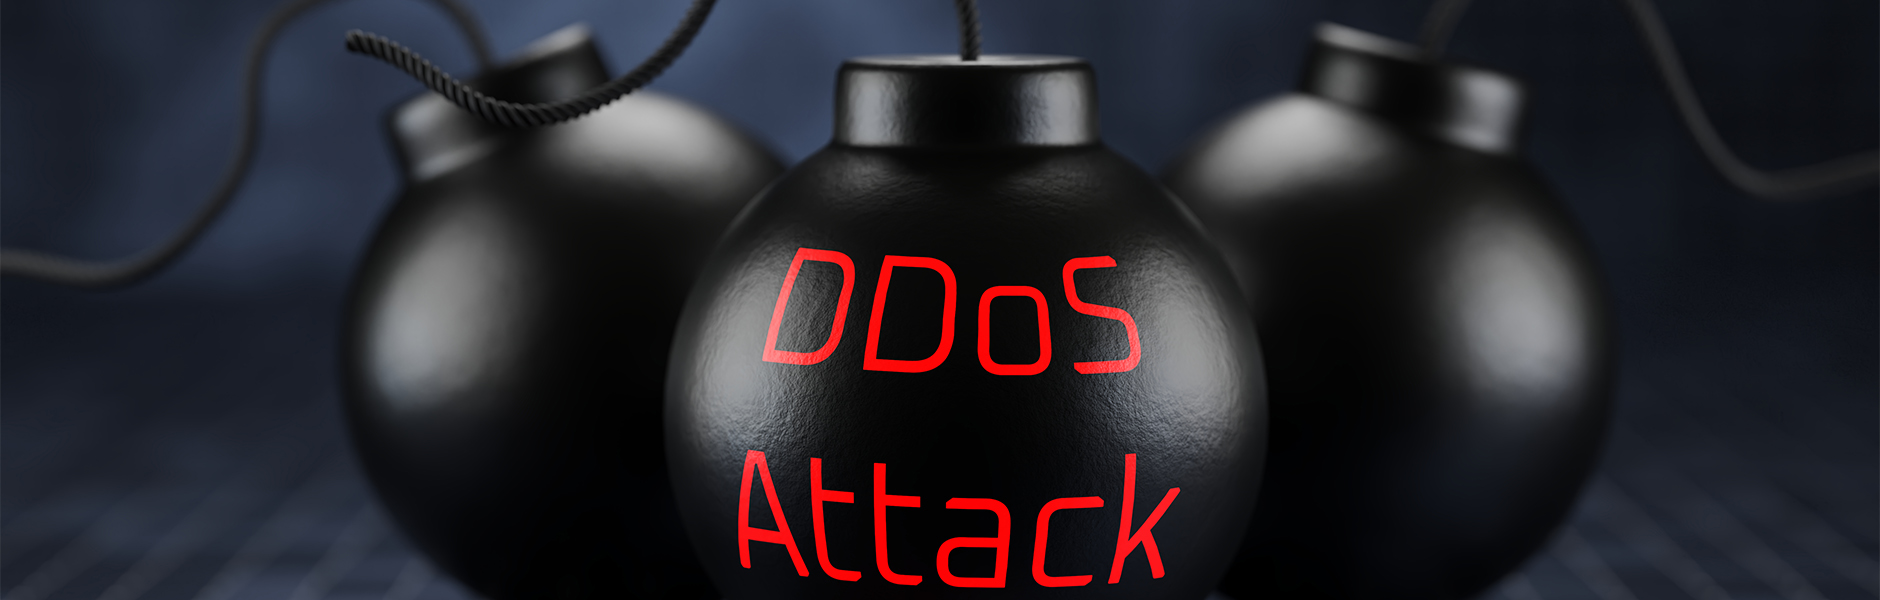 What is DDoS?